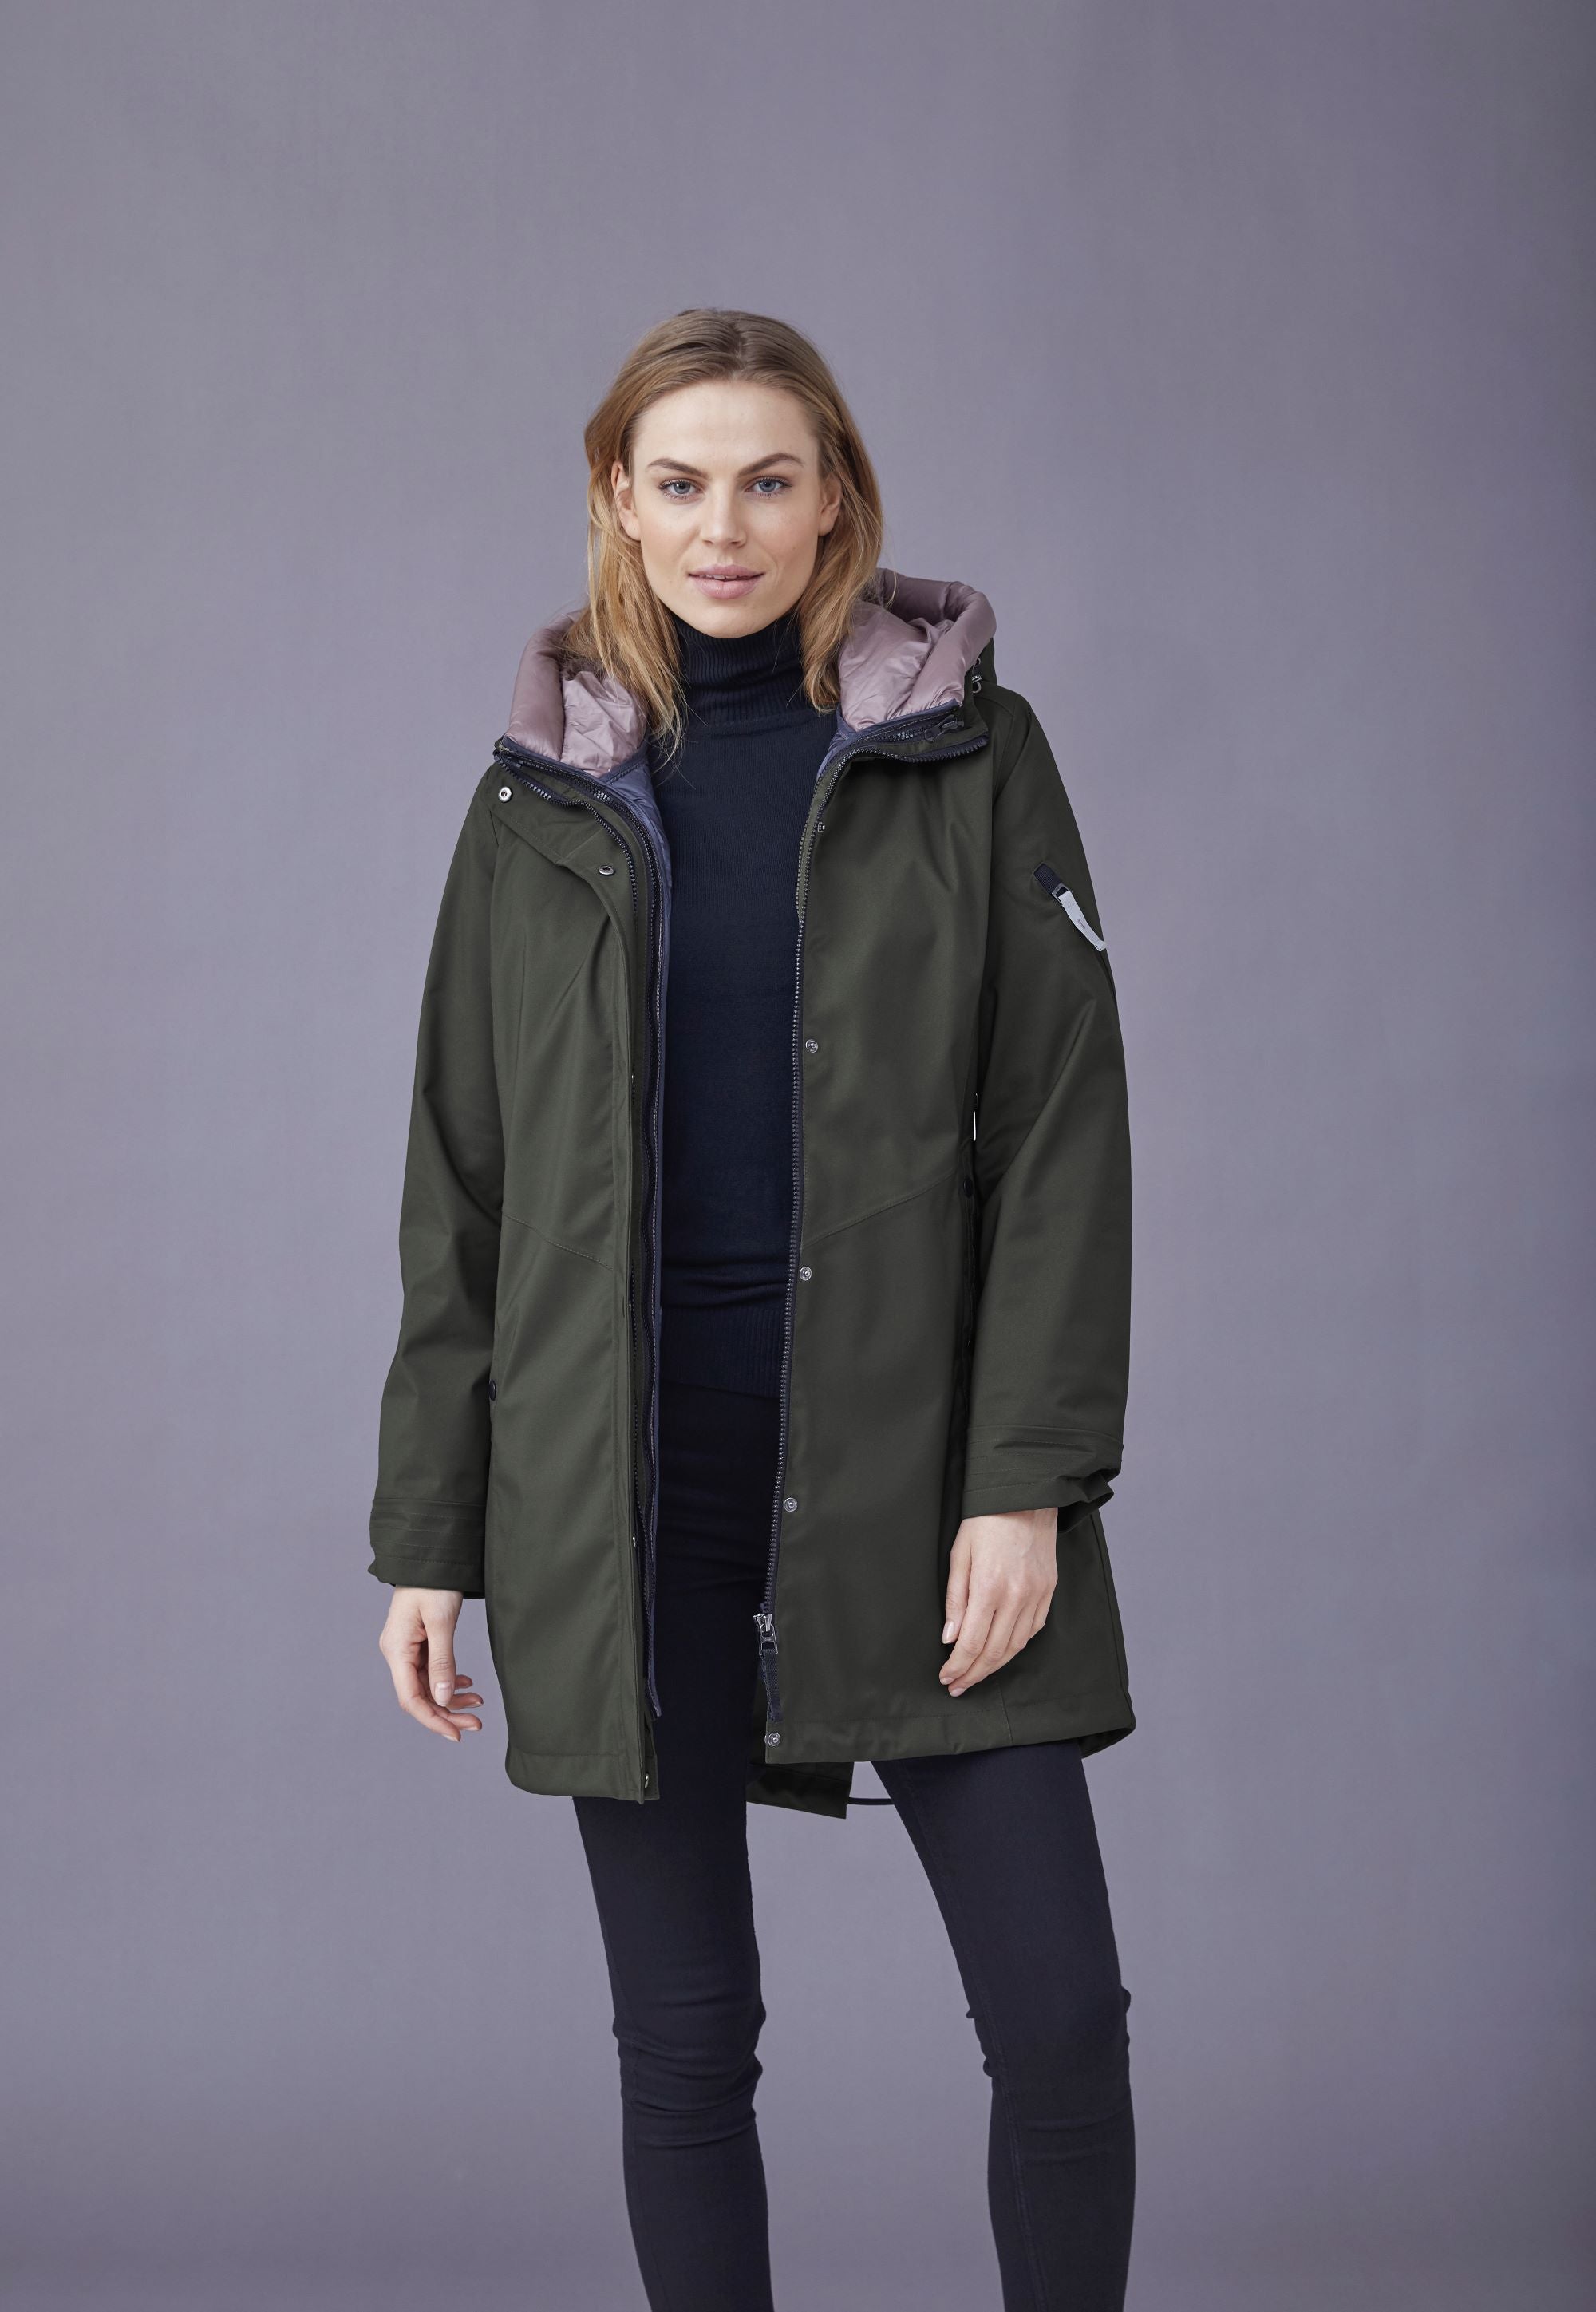 Winter Jackets | For | Every Occasion Choices Timeless